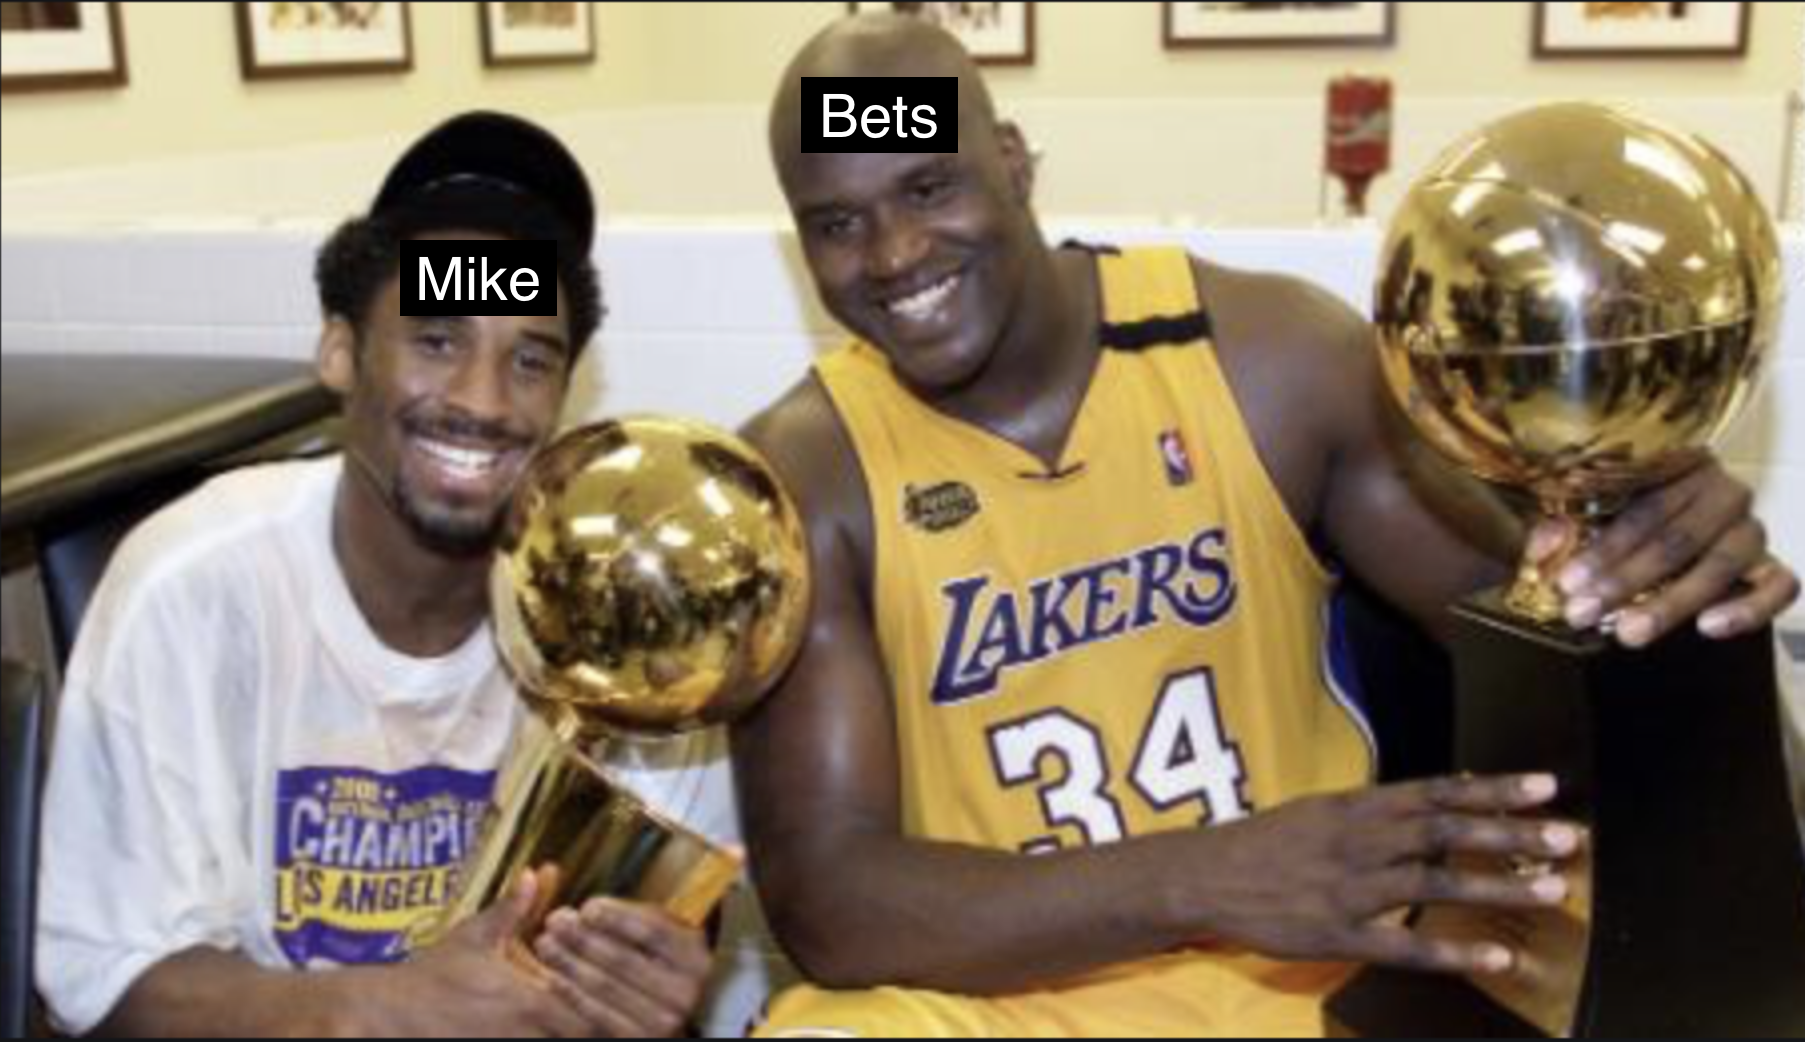 Mike Bets #44